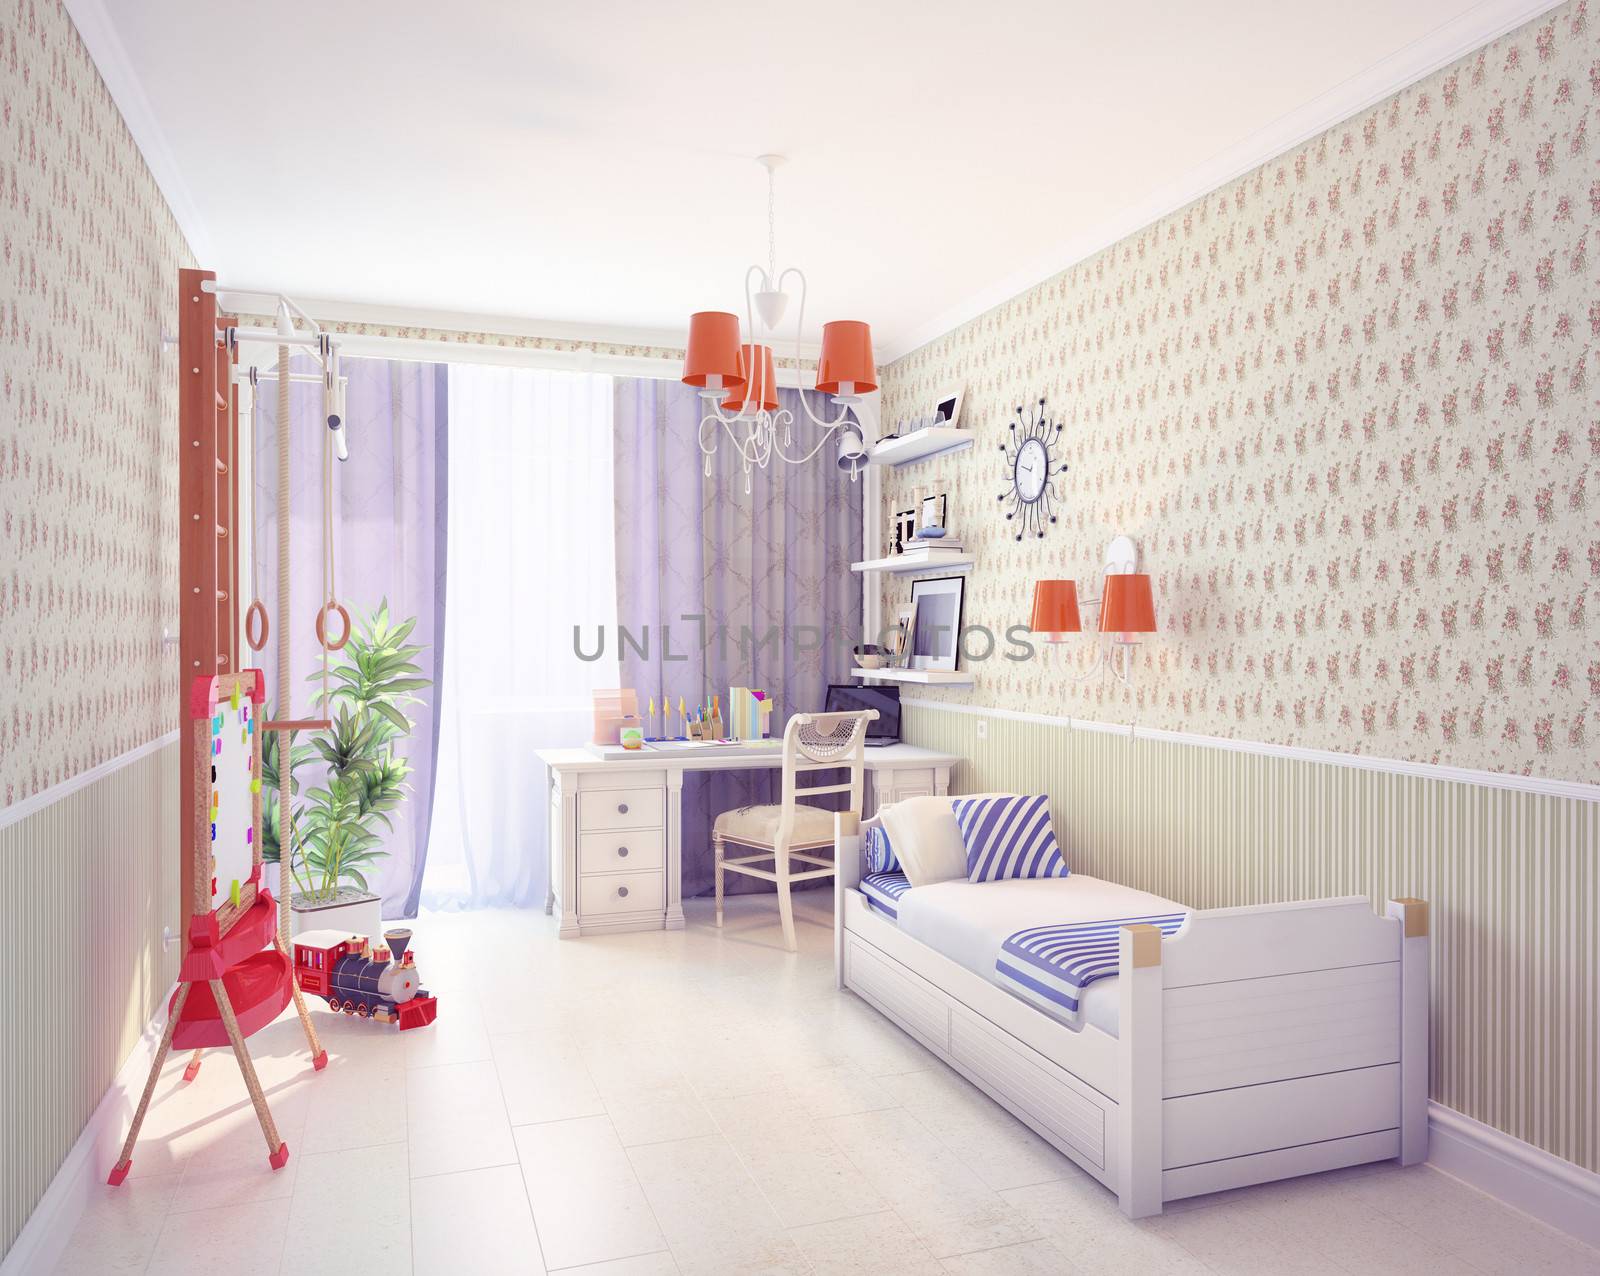 playroom interior. classic style concept